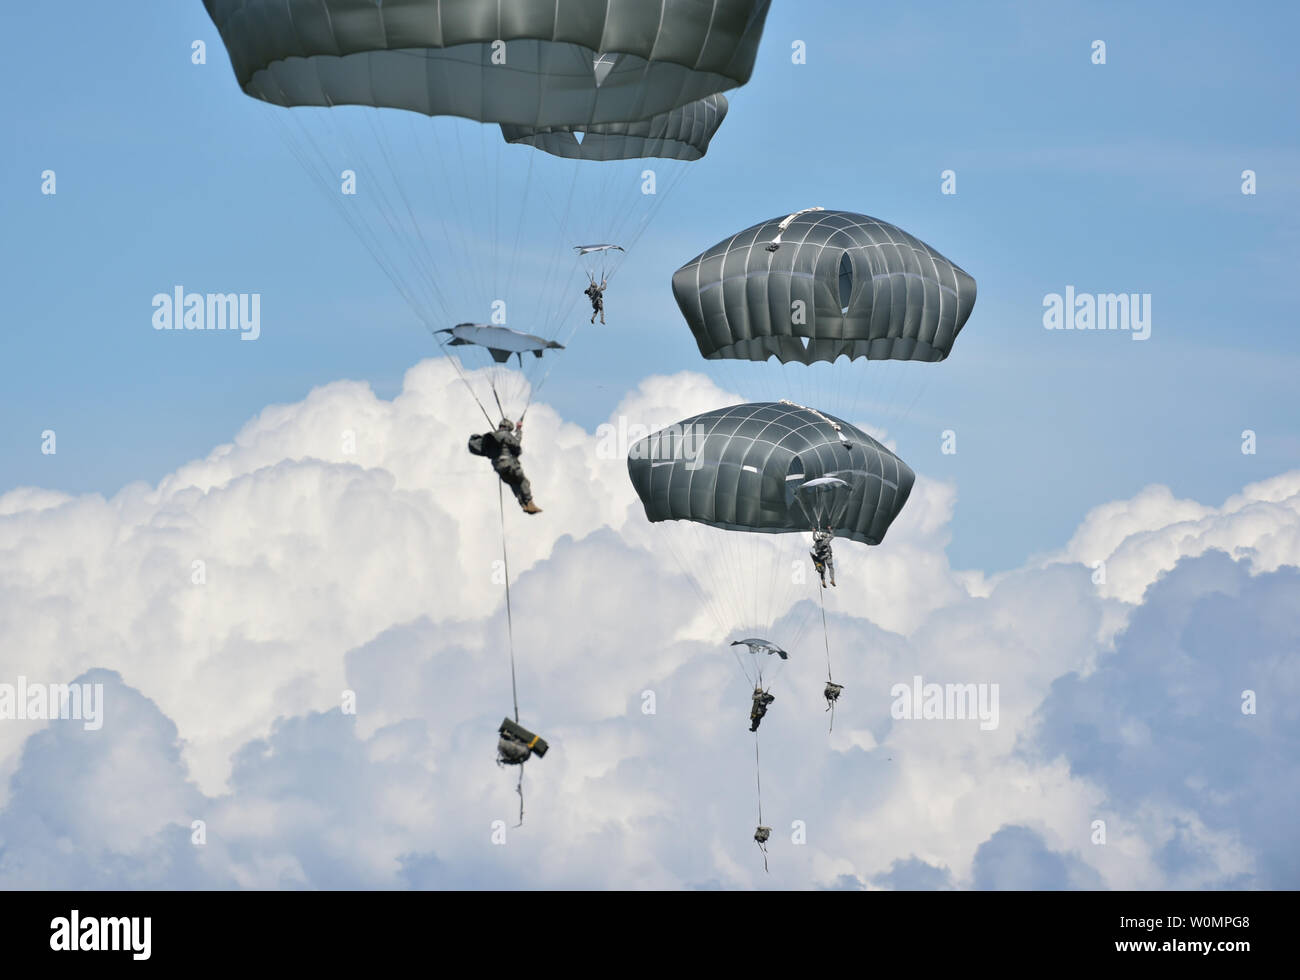 Paratroopers assigned to the 4th Infantry Brigade Combat Team (Airborne), 25th Infantry Division, U.S. Army Alaska, execute an airborne proficiency operation at Joint Base Elmendorf-Richardson, Alaska, June 9, 2016, during Exercise Arctic Aurora. Arctic Aurora is a yearly bilateral training exercise involving elements of the Spartan Brigade and the Japan Ground Self-Defense Force, which focuses on strengthening ties between the two by executing combined small unit airborne proficiency operations and basic small arms marksmanship. Photo by Justin Connaher/U.S. Air Force/UPI Stock Photo